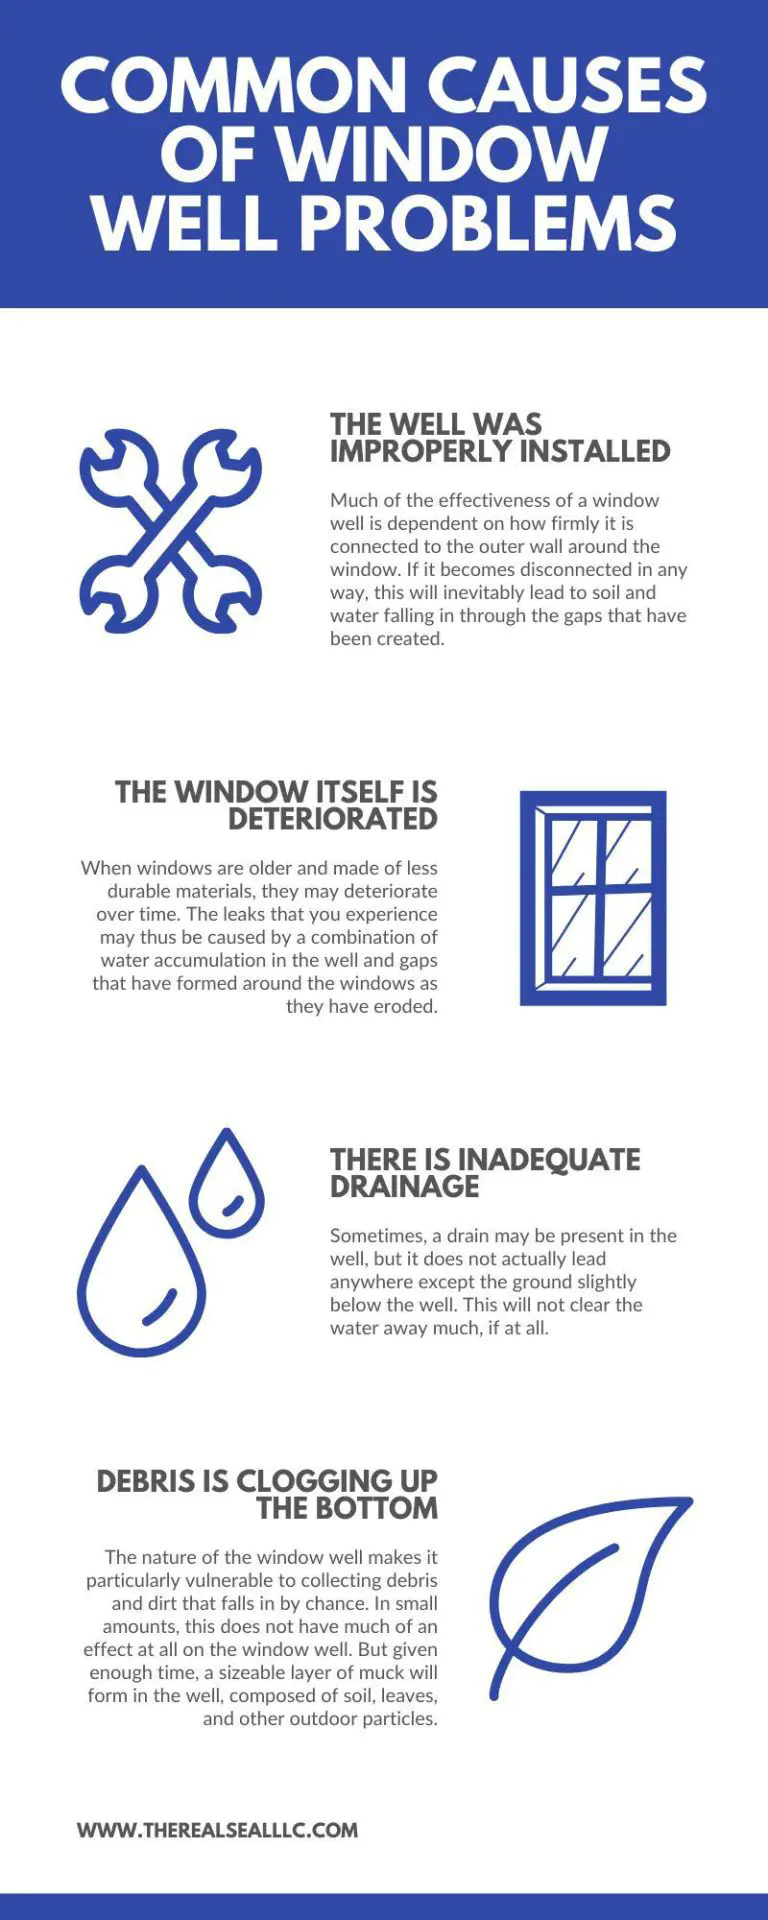 Common Causes of Window Well Problems